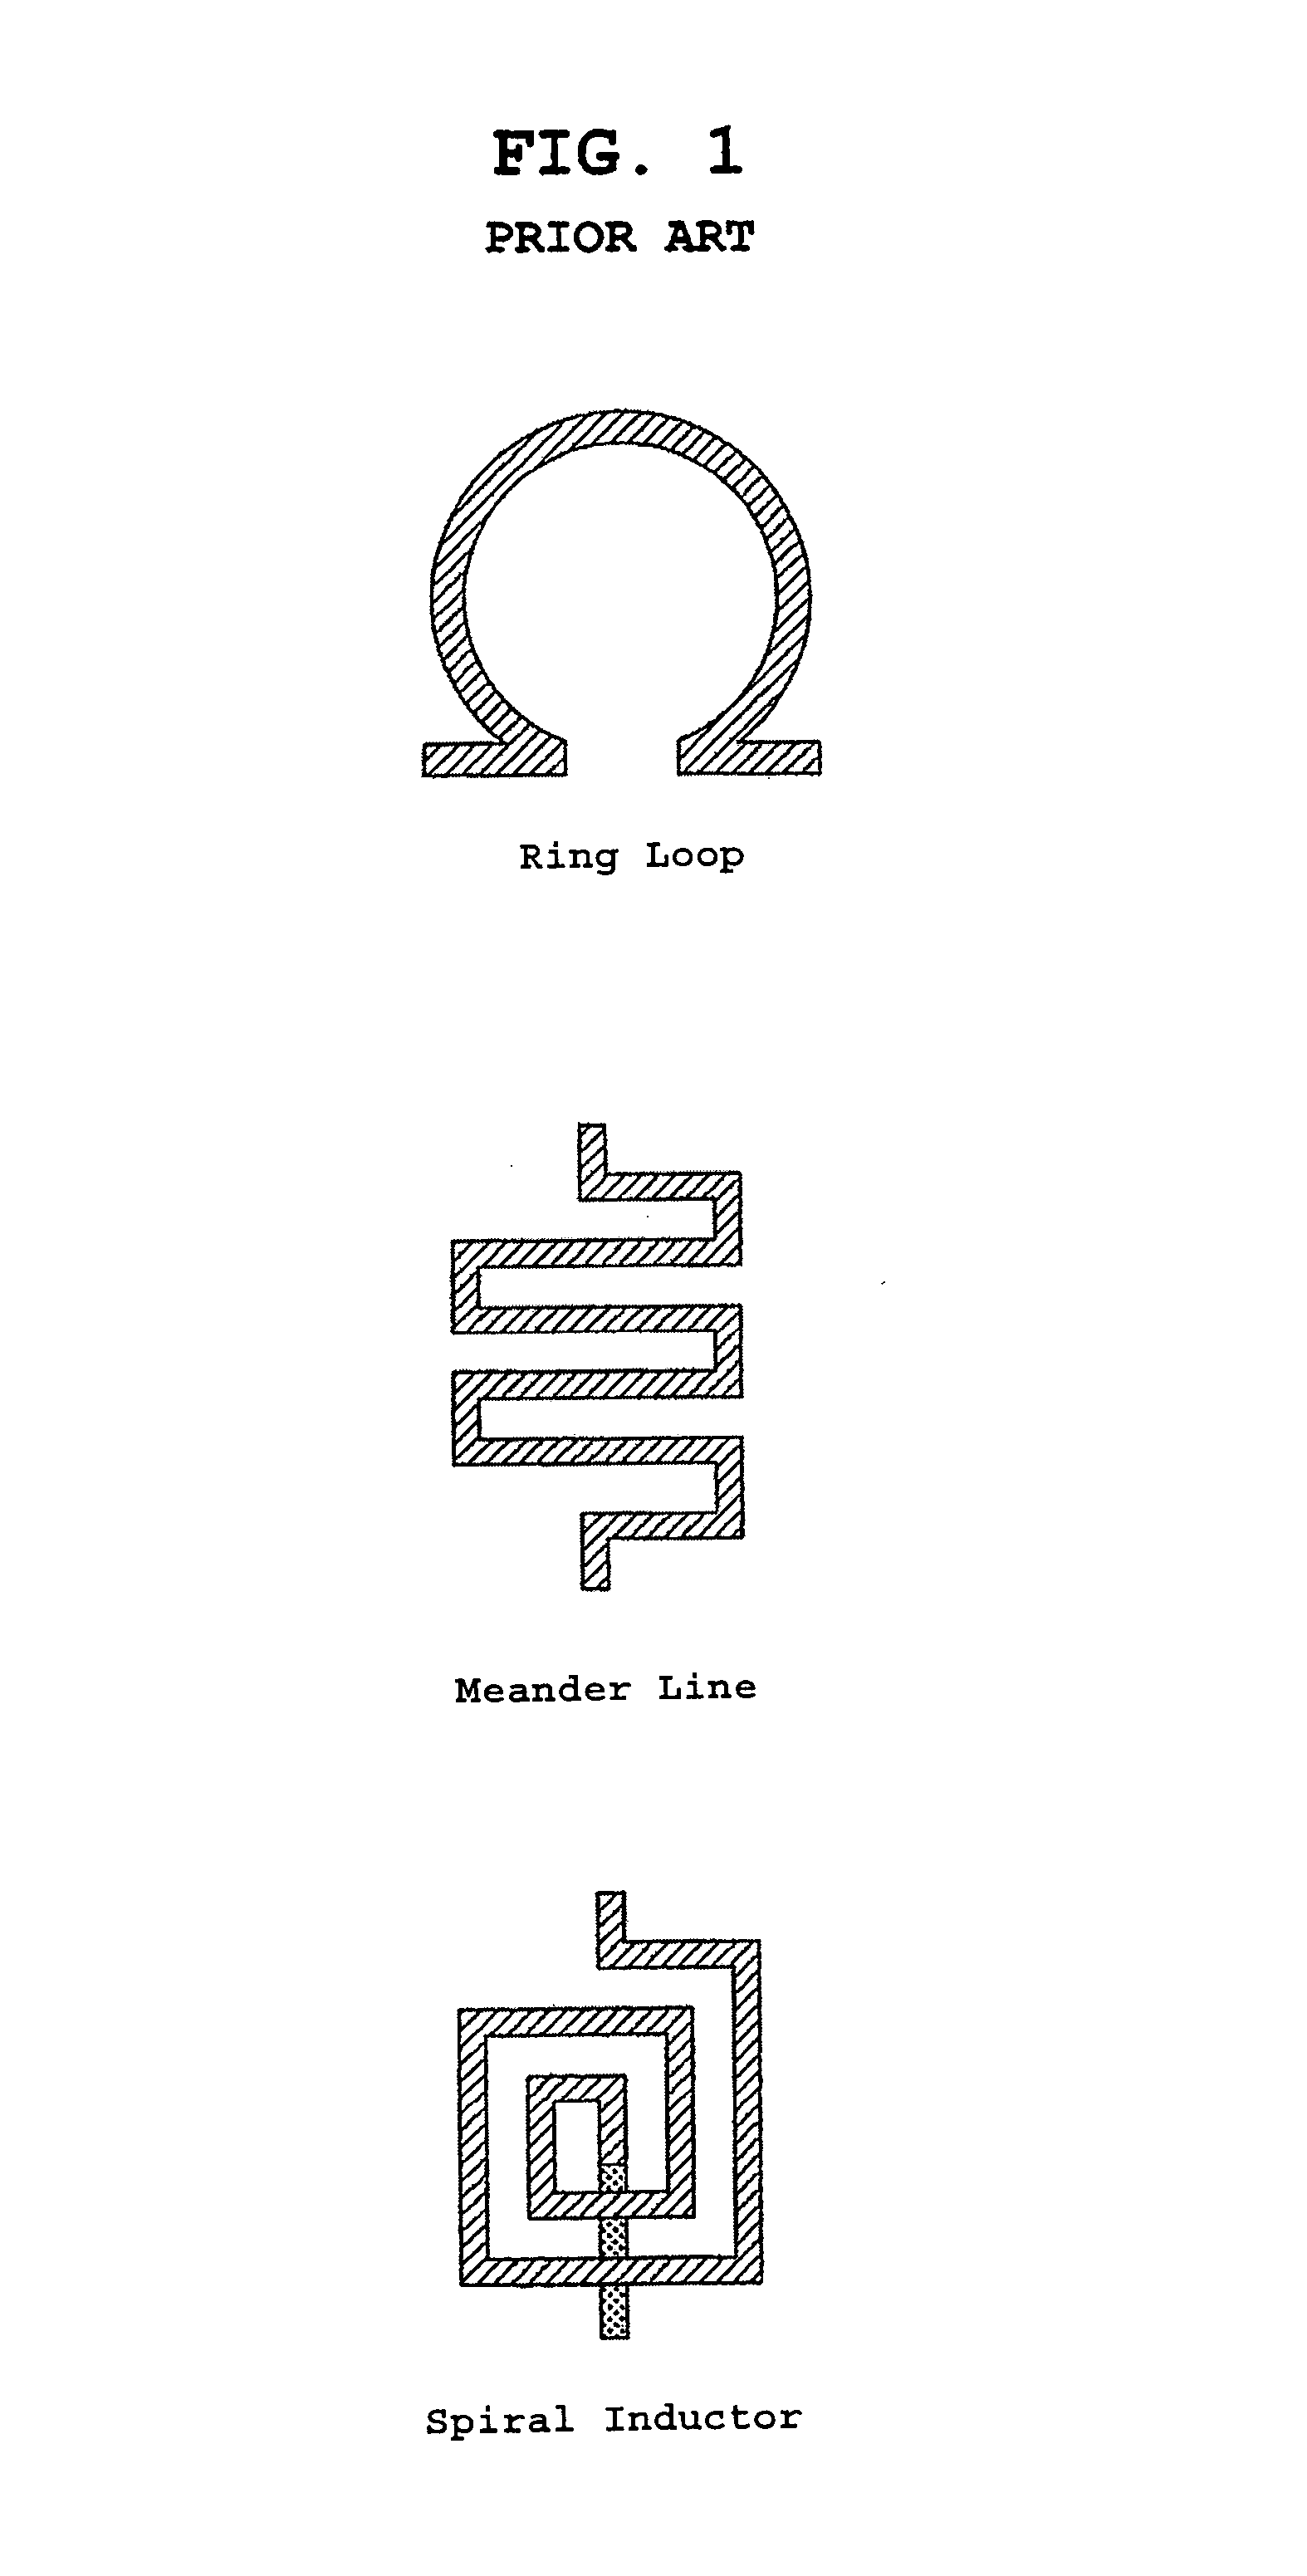 Printed circuit board having three-dimensional spiral inductor and method of fabricating same